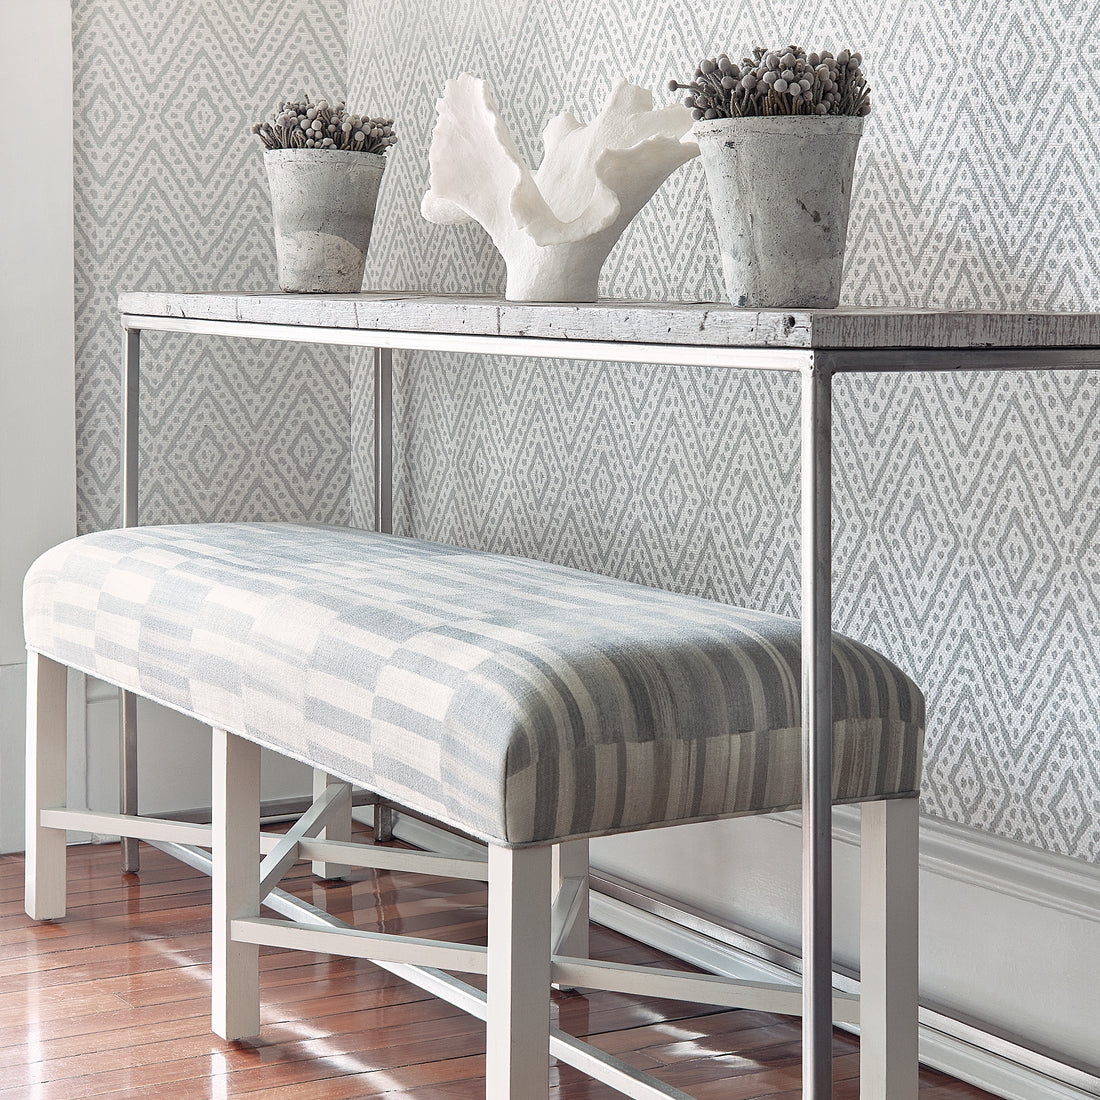 Bellwood Bench in Tansman printed fabric in Grey - pattern number AF78733 - by Anna French in the Palampore collection